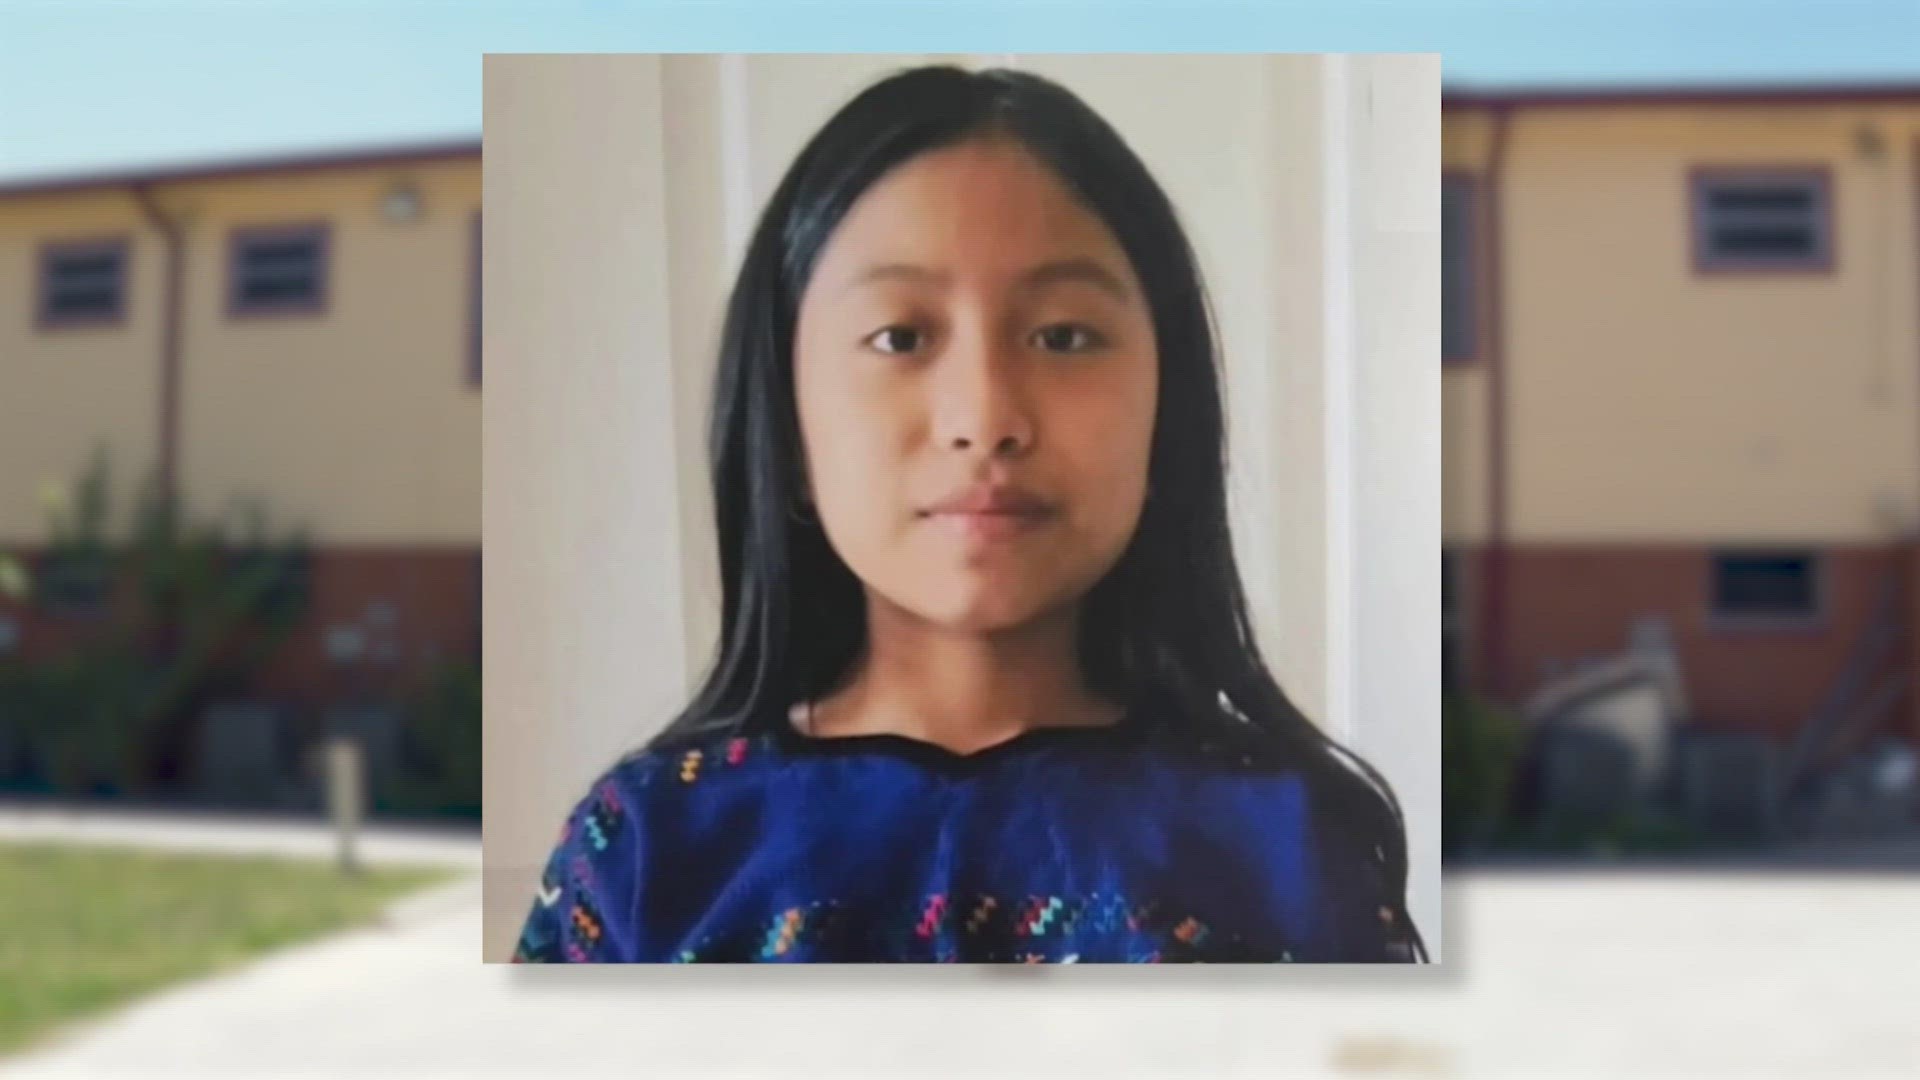 Maria Gonzalez, 11, was strangled and sexually assaulted at her home while her dad was at work. Her body was found wrapped in a trash bag.